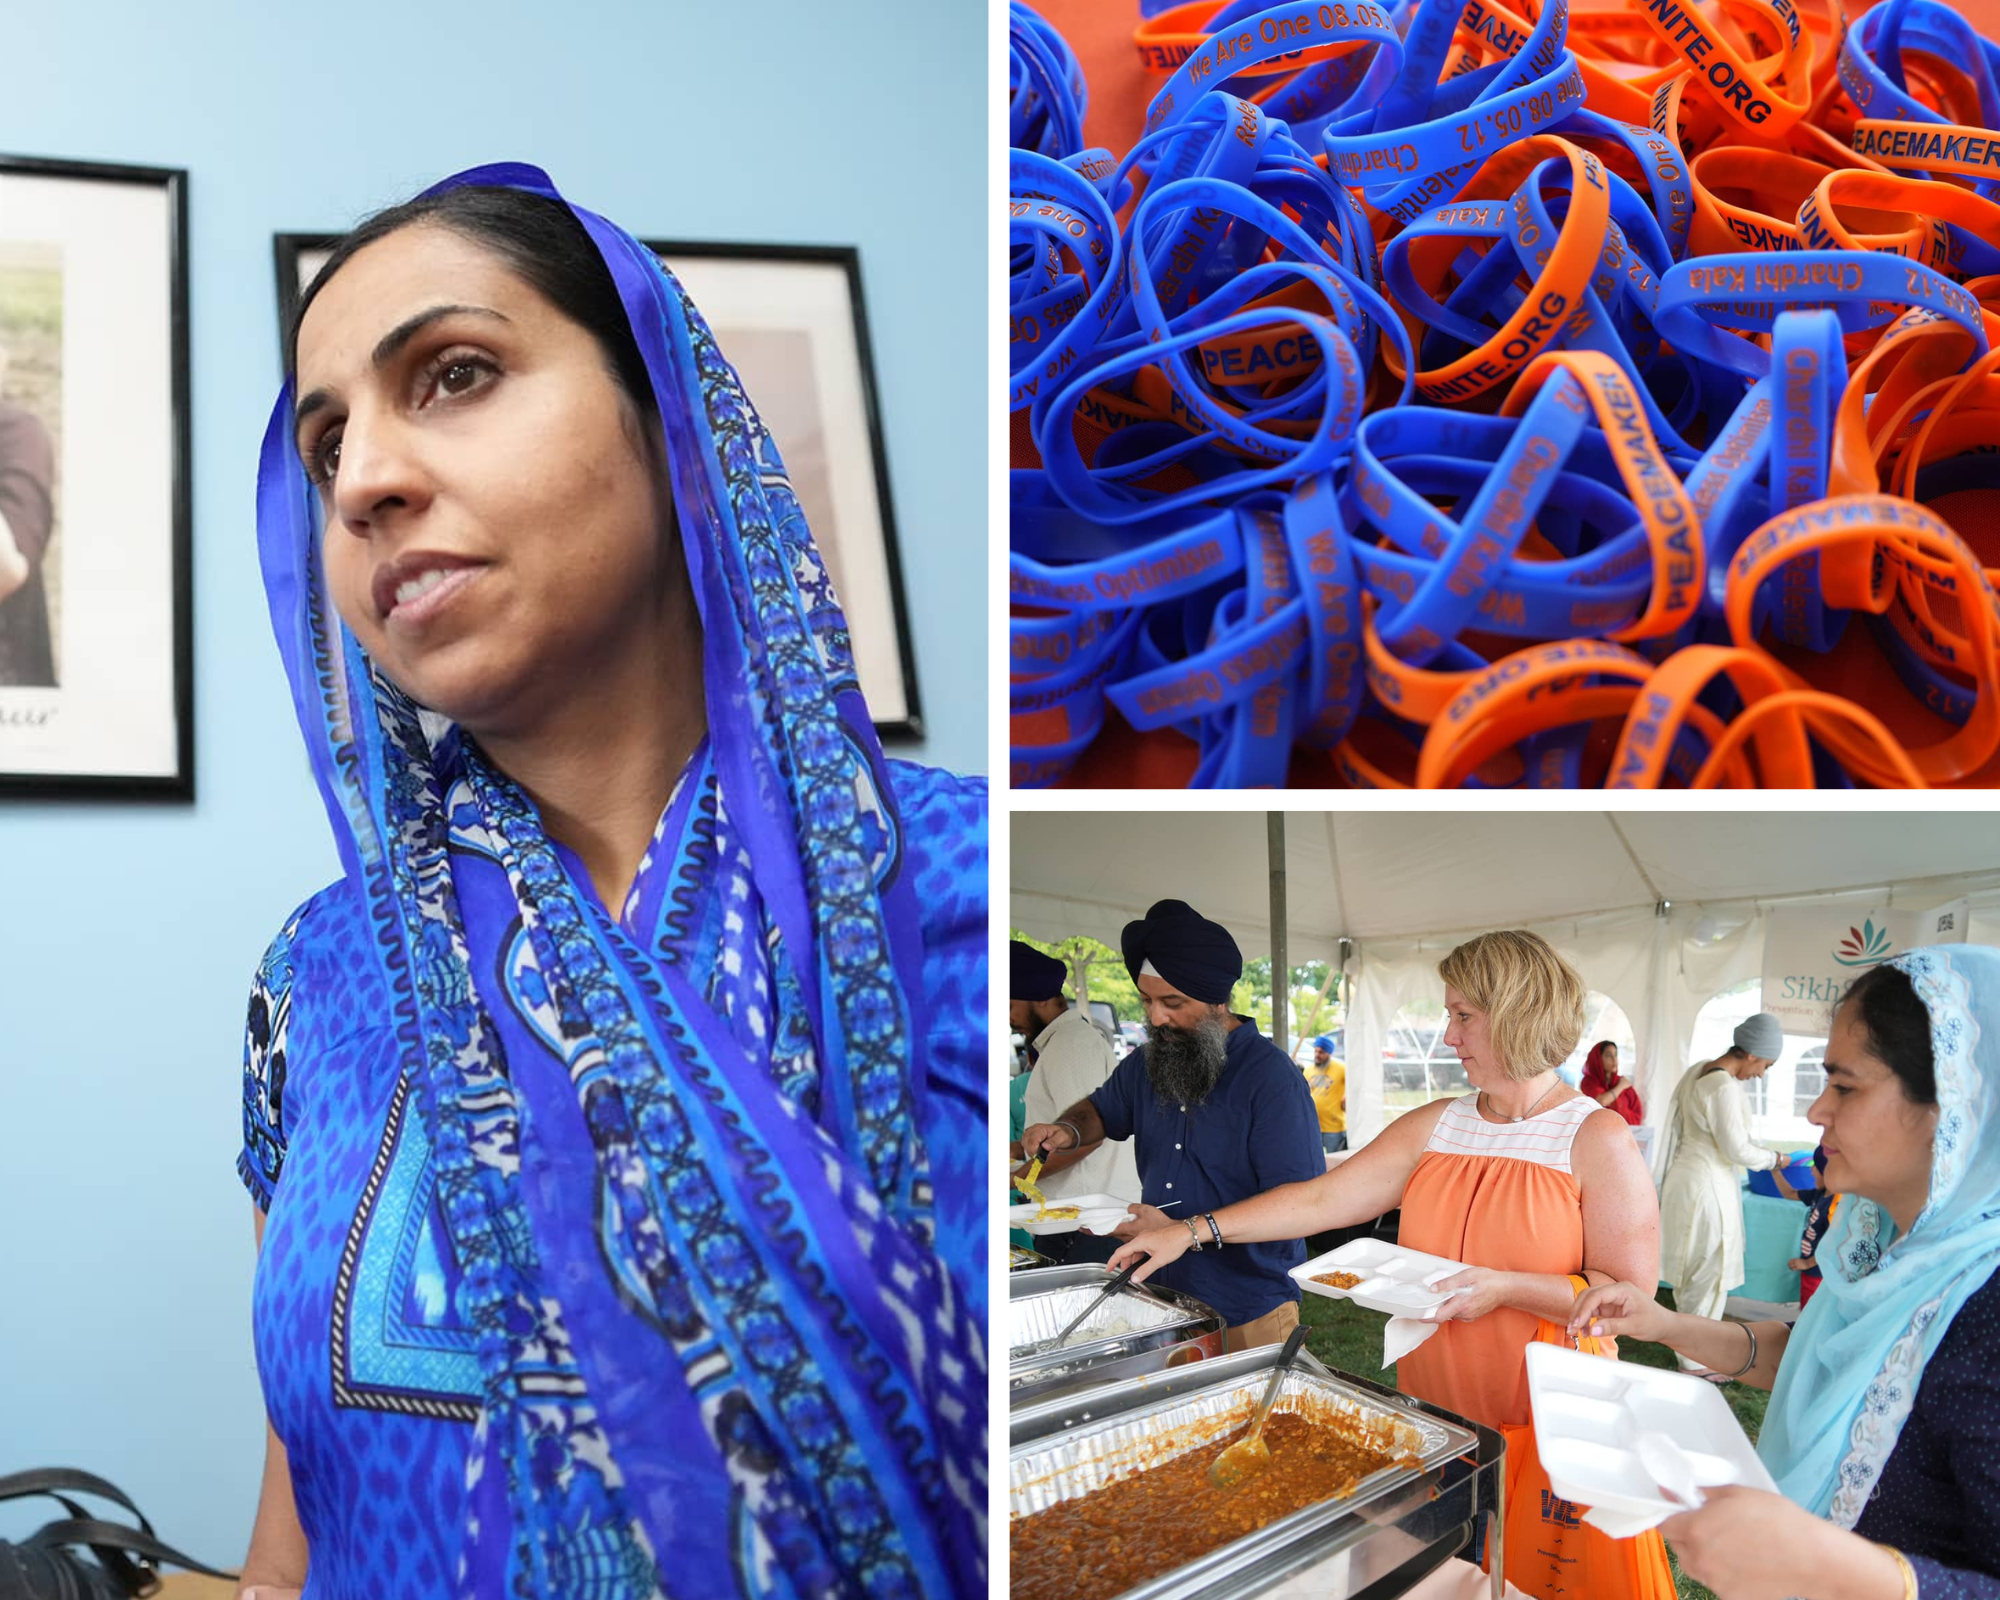 More photos from the Chardi Kala event at the Sikh Temple of Wisconsin on 7.22.2022